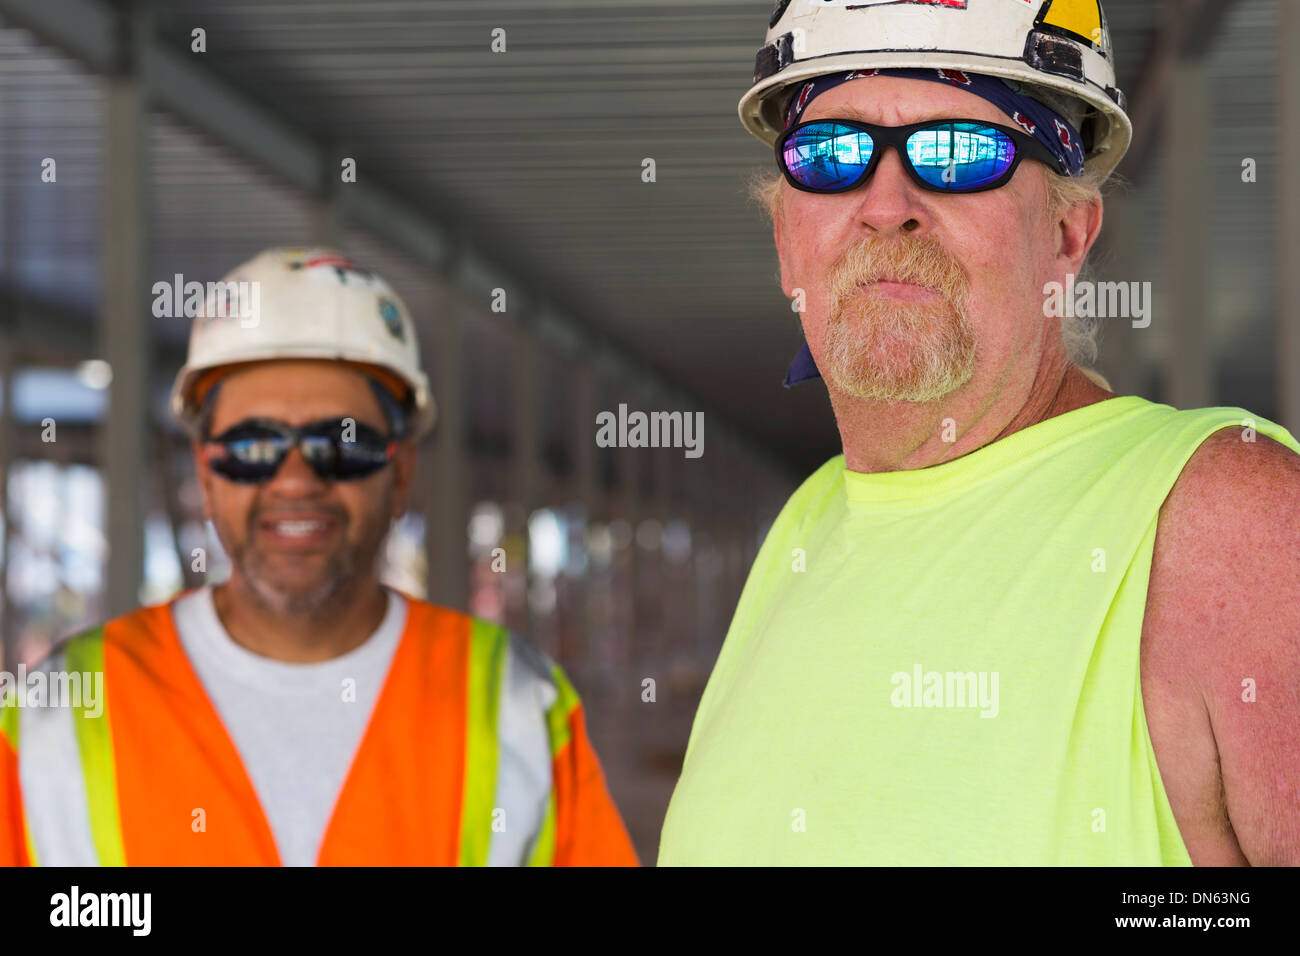 Workers smiling together at construction site Banque D'Images